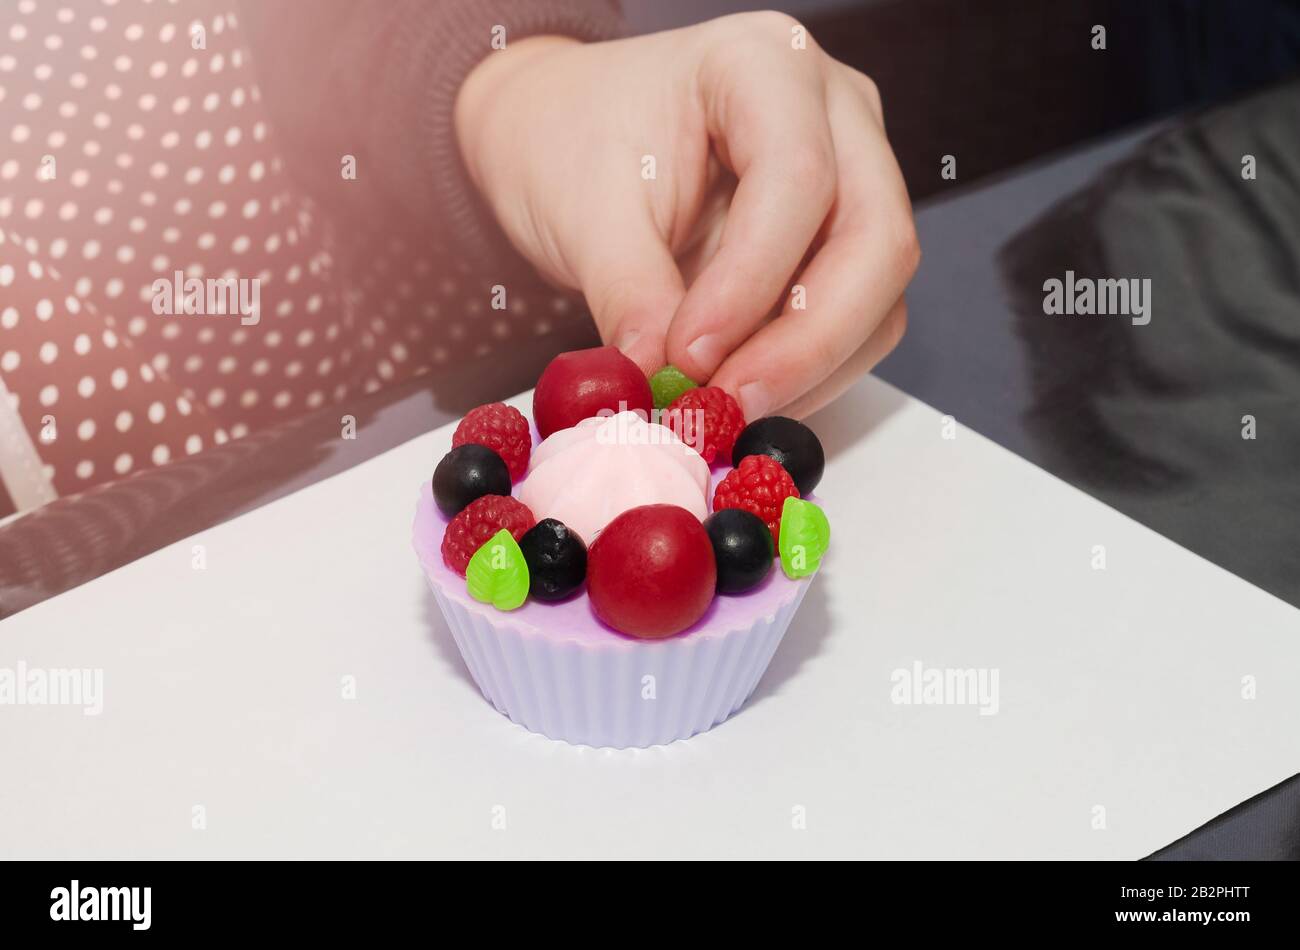 Fragrant berry bath soap is decorated with a child's hand. Stock Photo